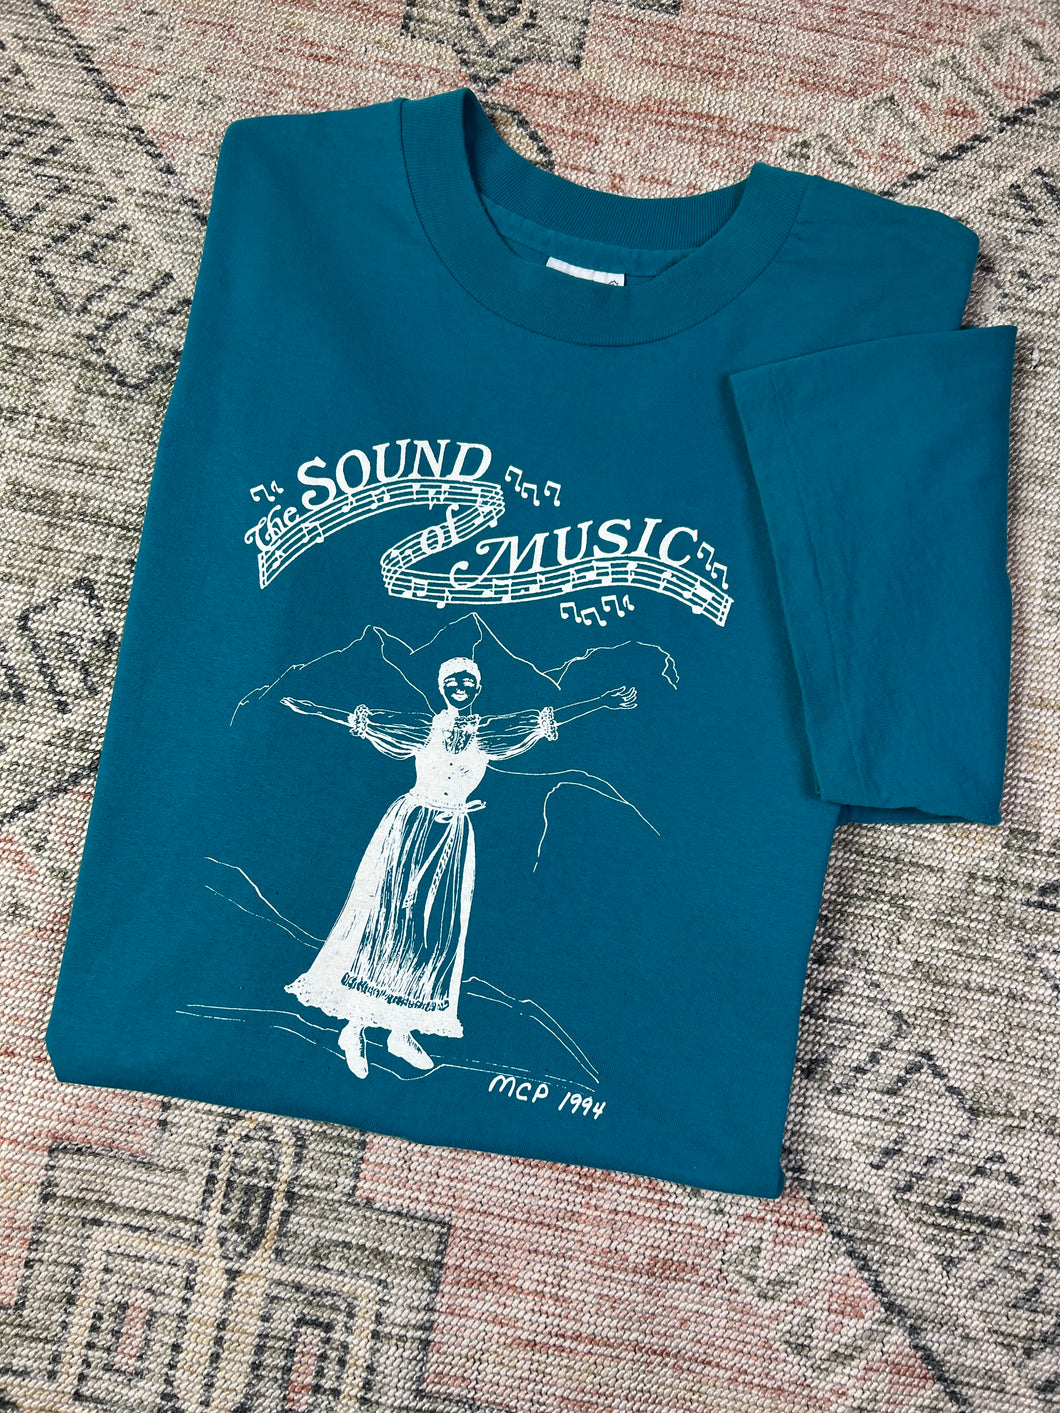 Vintage 90s The Sound of Music Tee (L/XL)